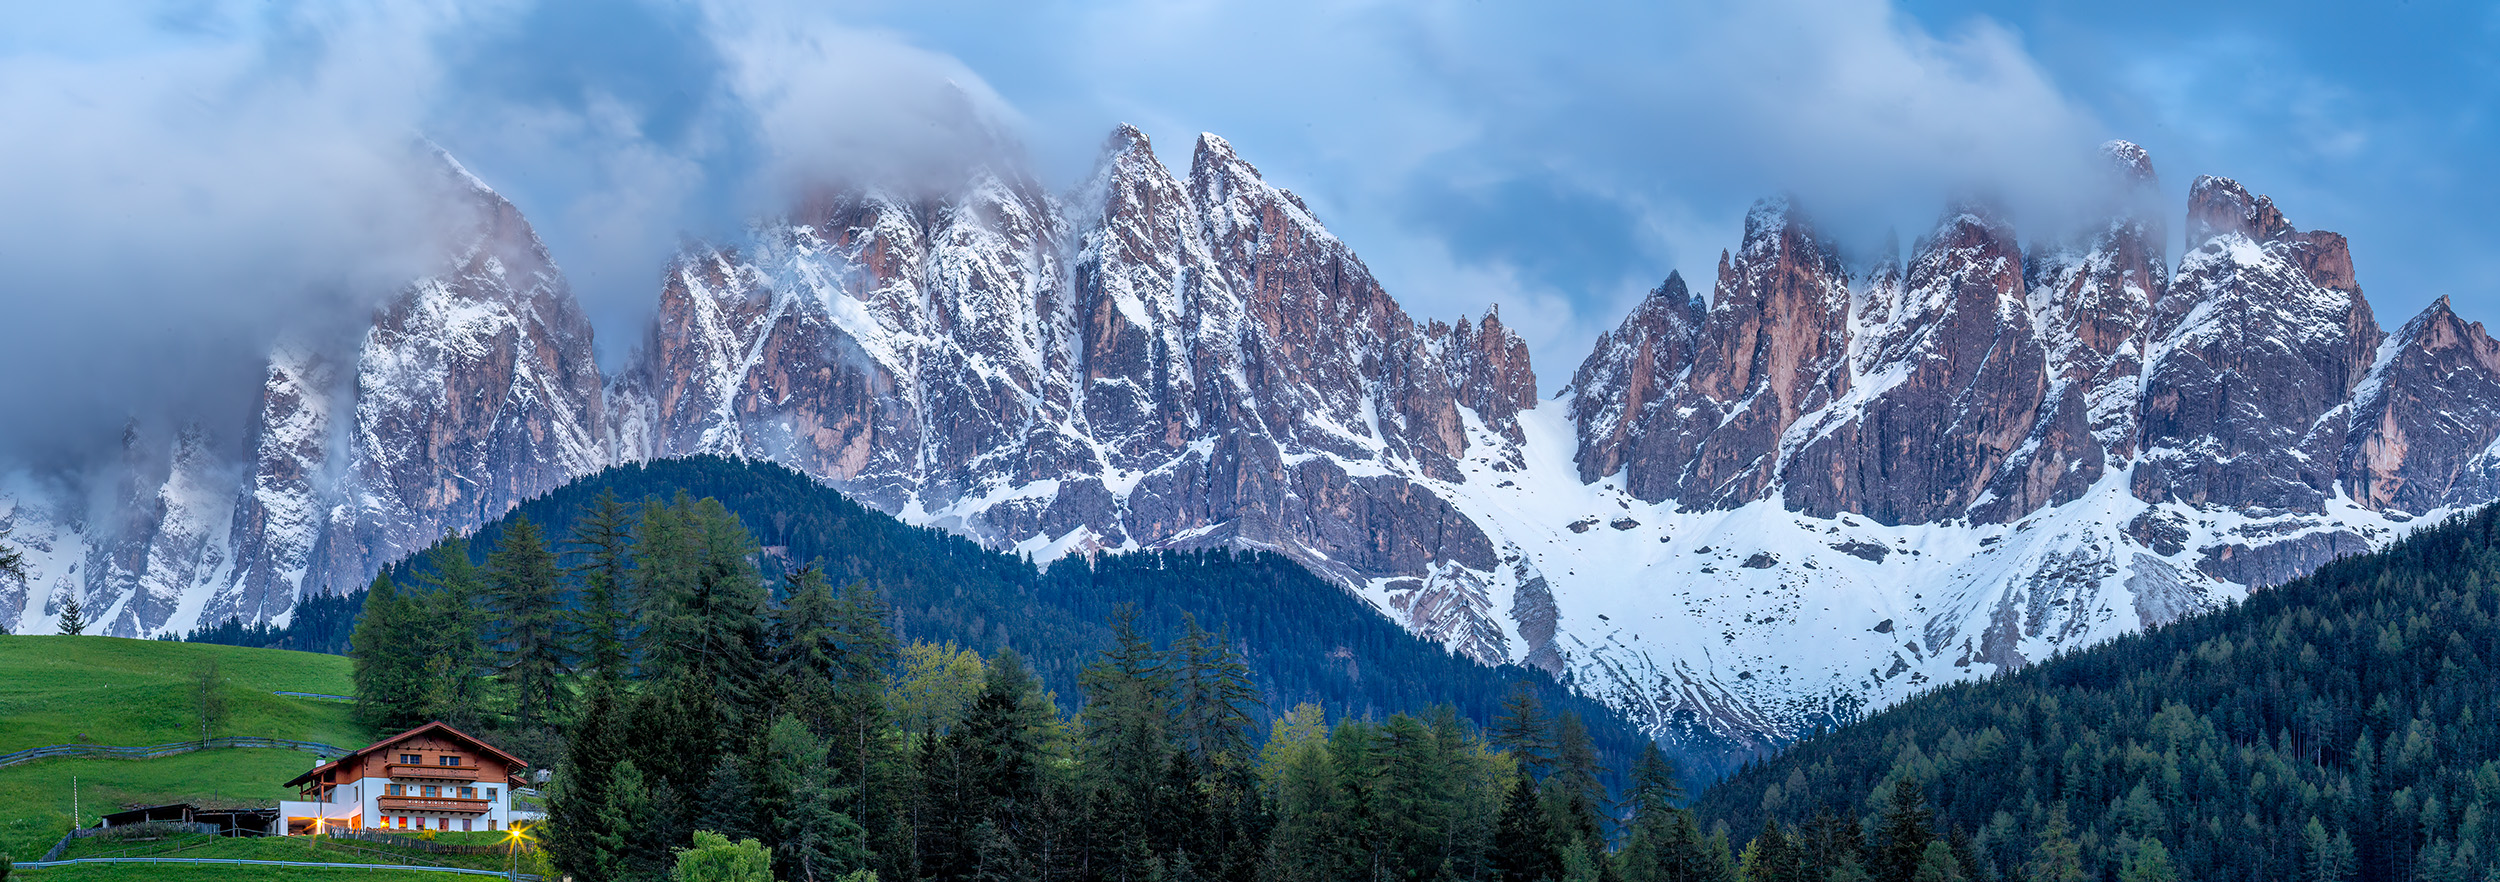 As daylight fades over Val di Funes in Italy's Sud Tyrol region, this panoramic image captures the magic of the moment. A cozy...